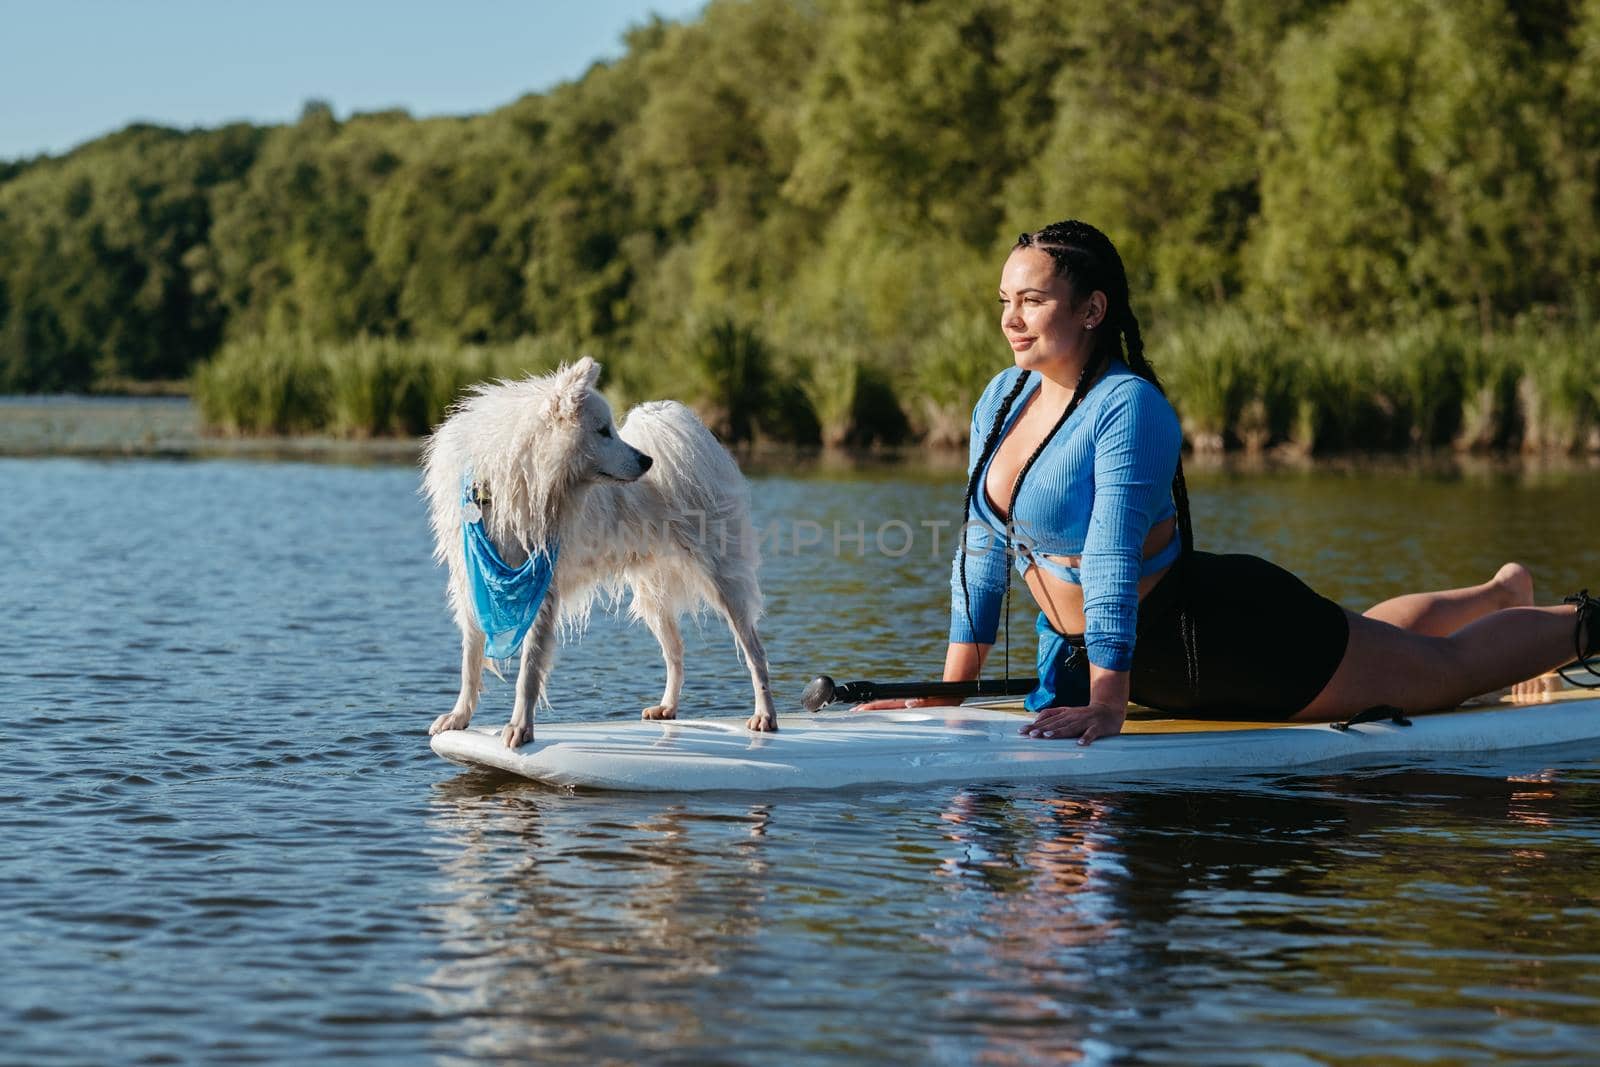 Woman Doing Stretching While Paddleboarding with Her Pet on City Lake, Snowy Japanese Spitz Dog Standing on Sup Board